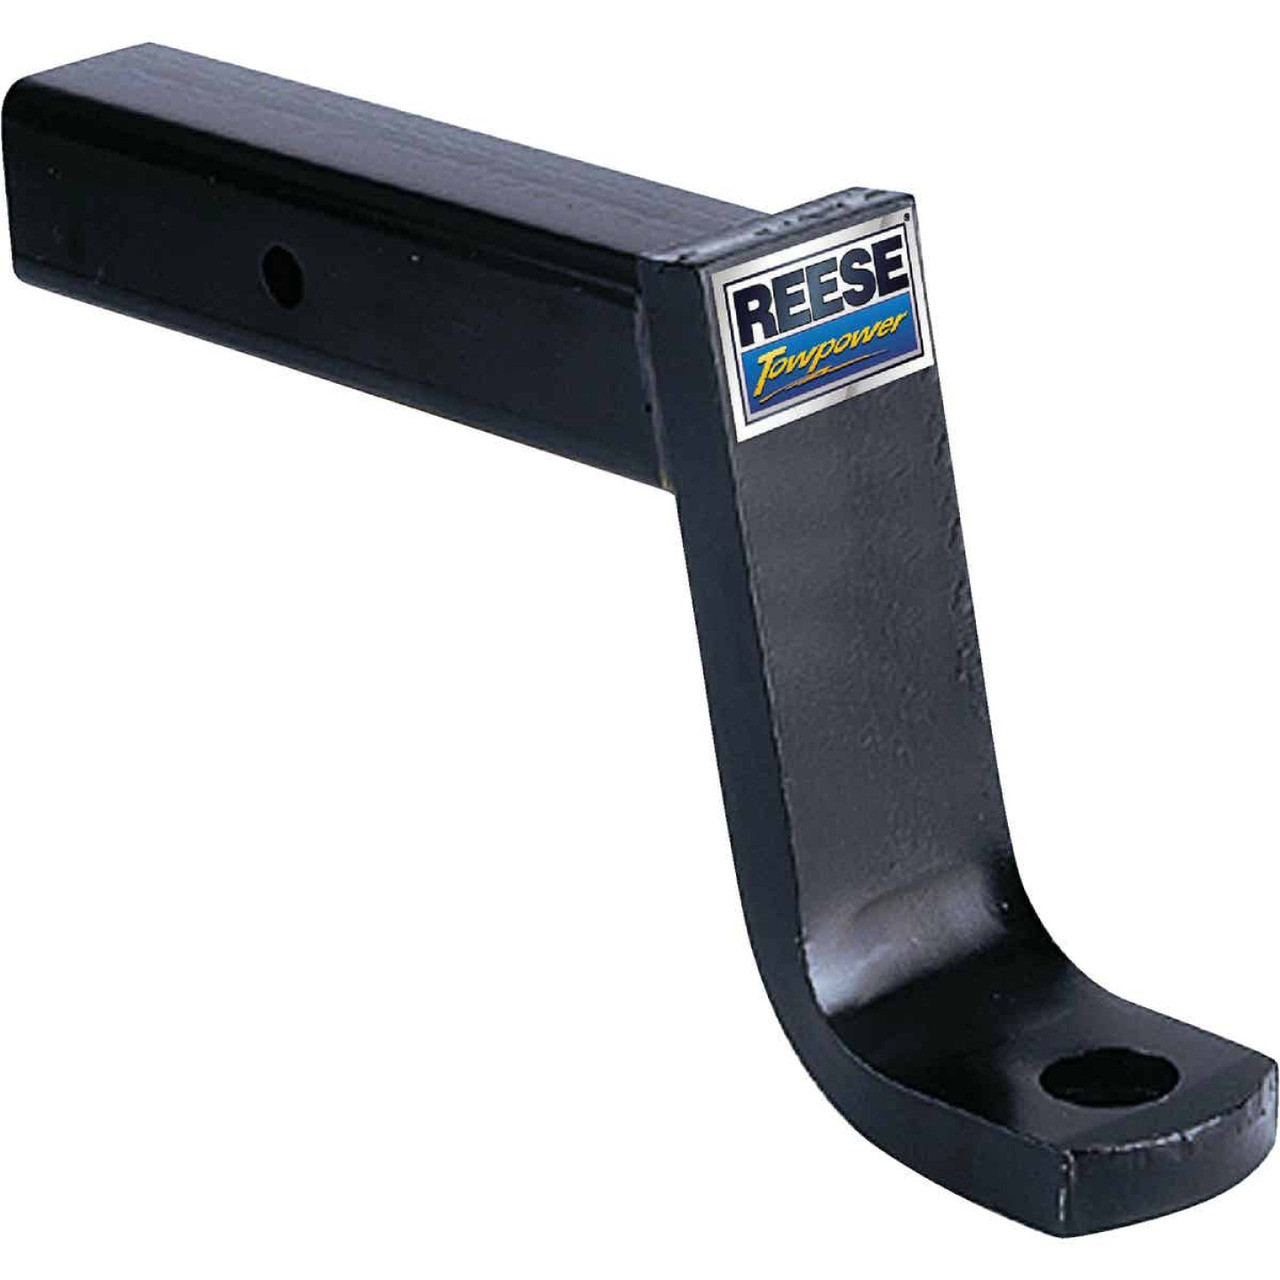 Reese Towpower 6-3/4 In. x 8 In. Drop Standard Hitch Draw Bar Reese Towpower 6-3/4 In. x 8 In. Drop Standard Hitch Draw Bar